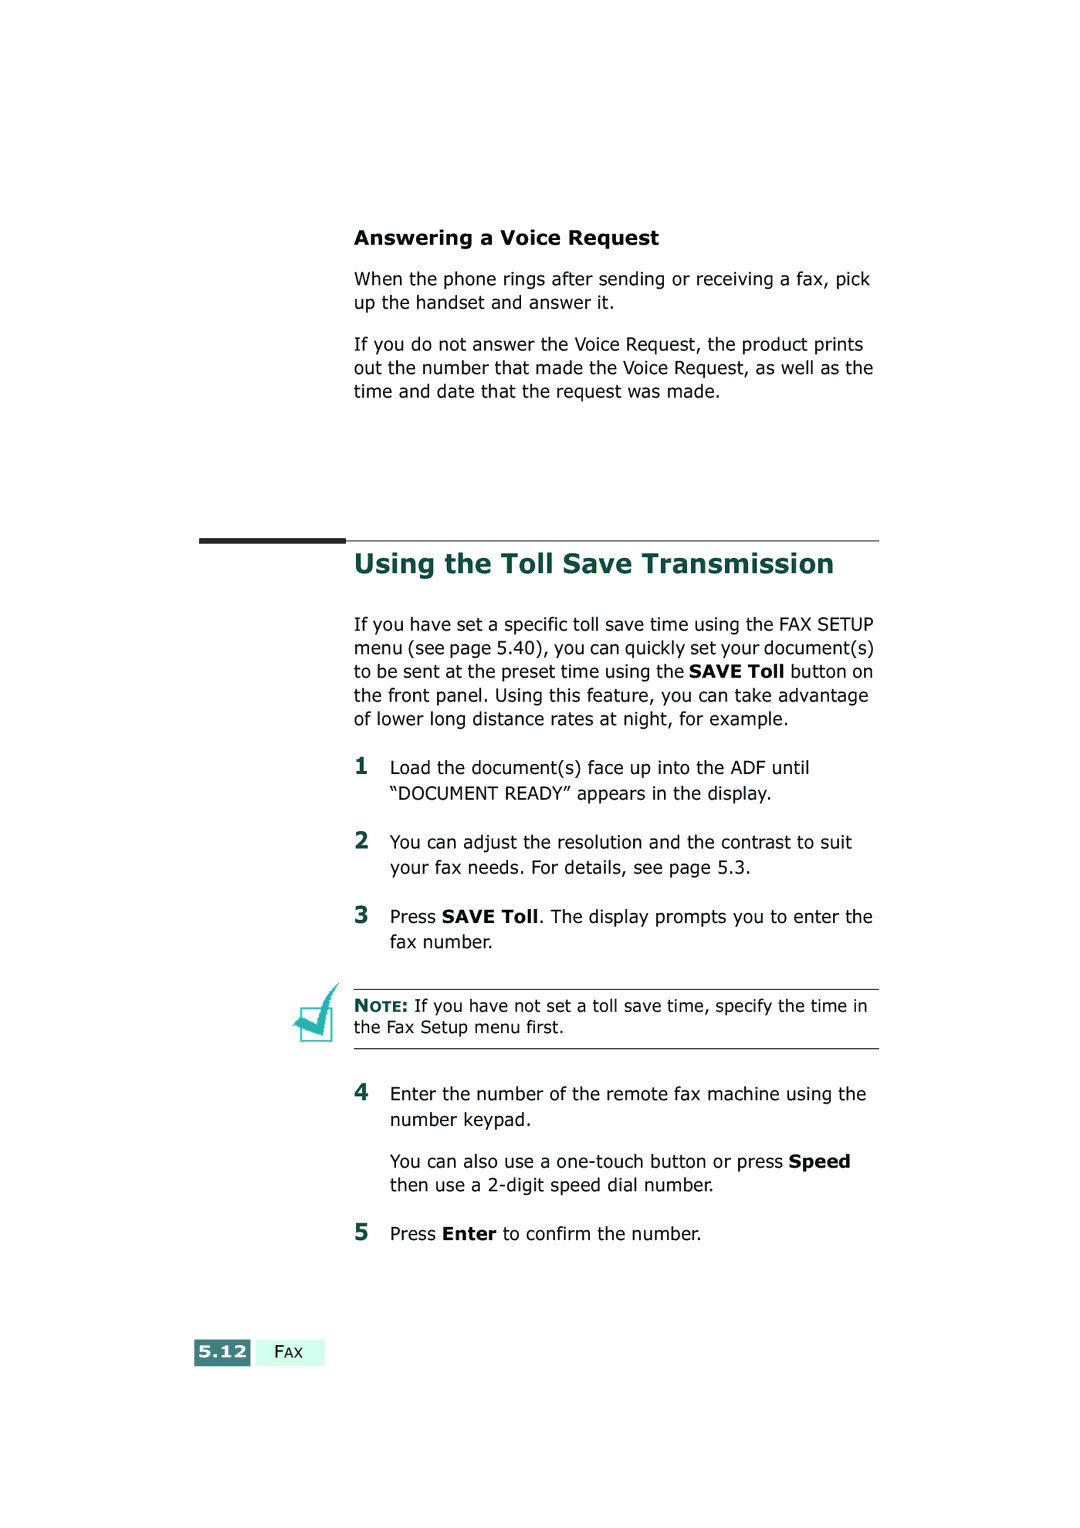 Samsung SF-430 manual Using the Toll Save Transmission, Answering a Voice Request 